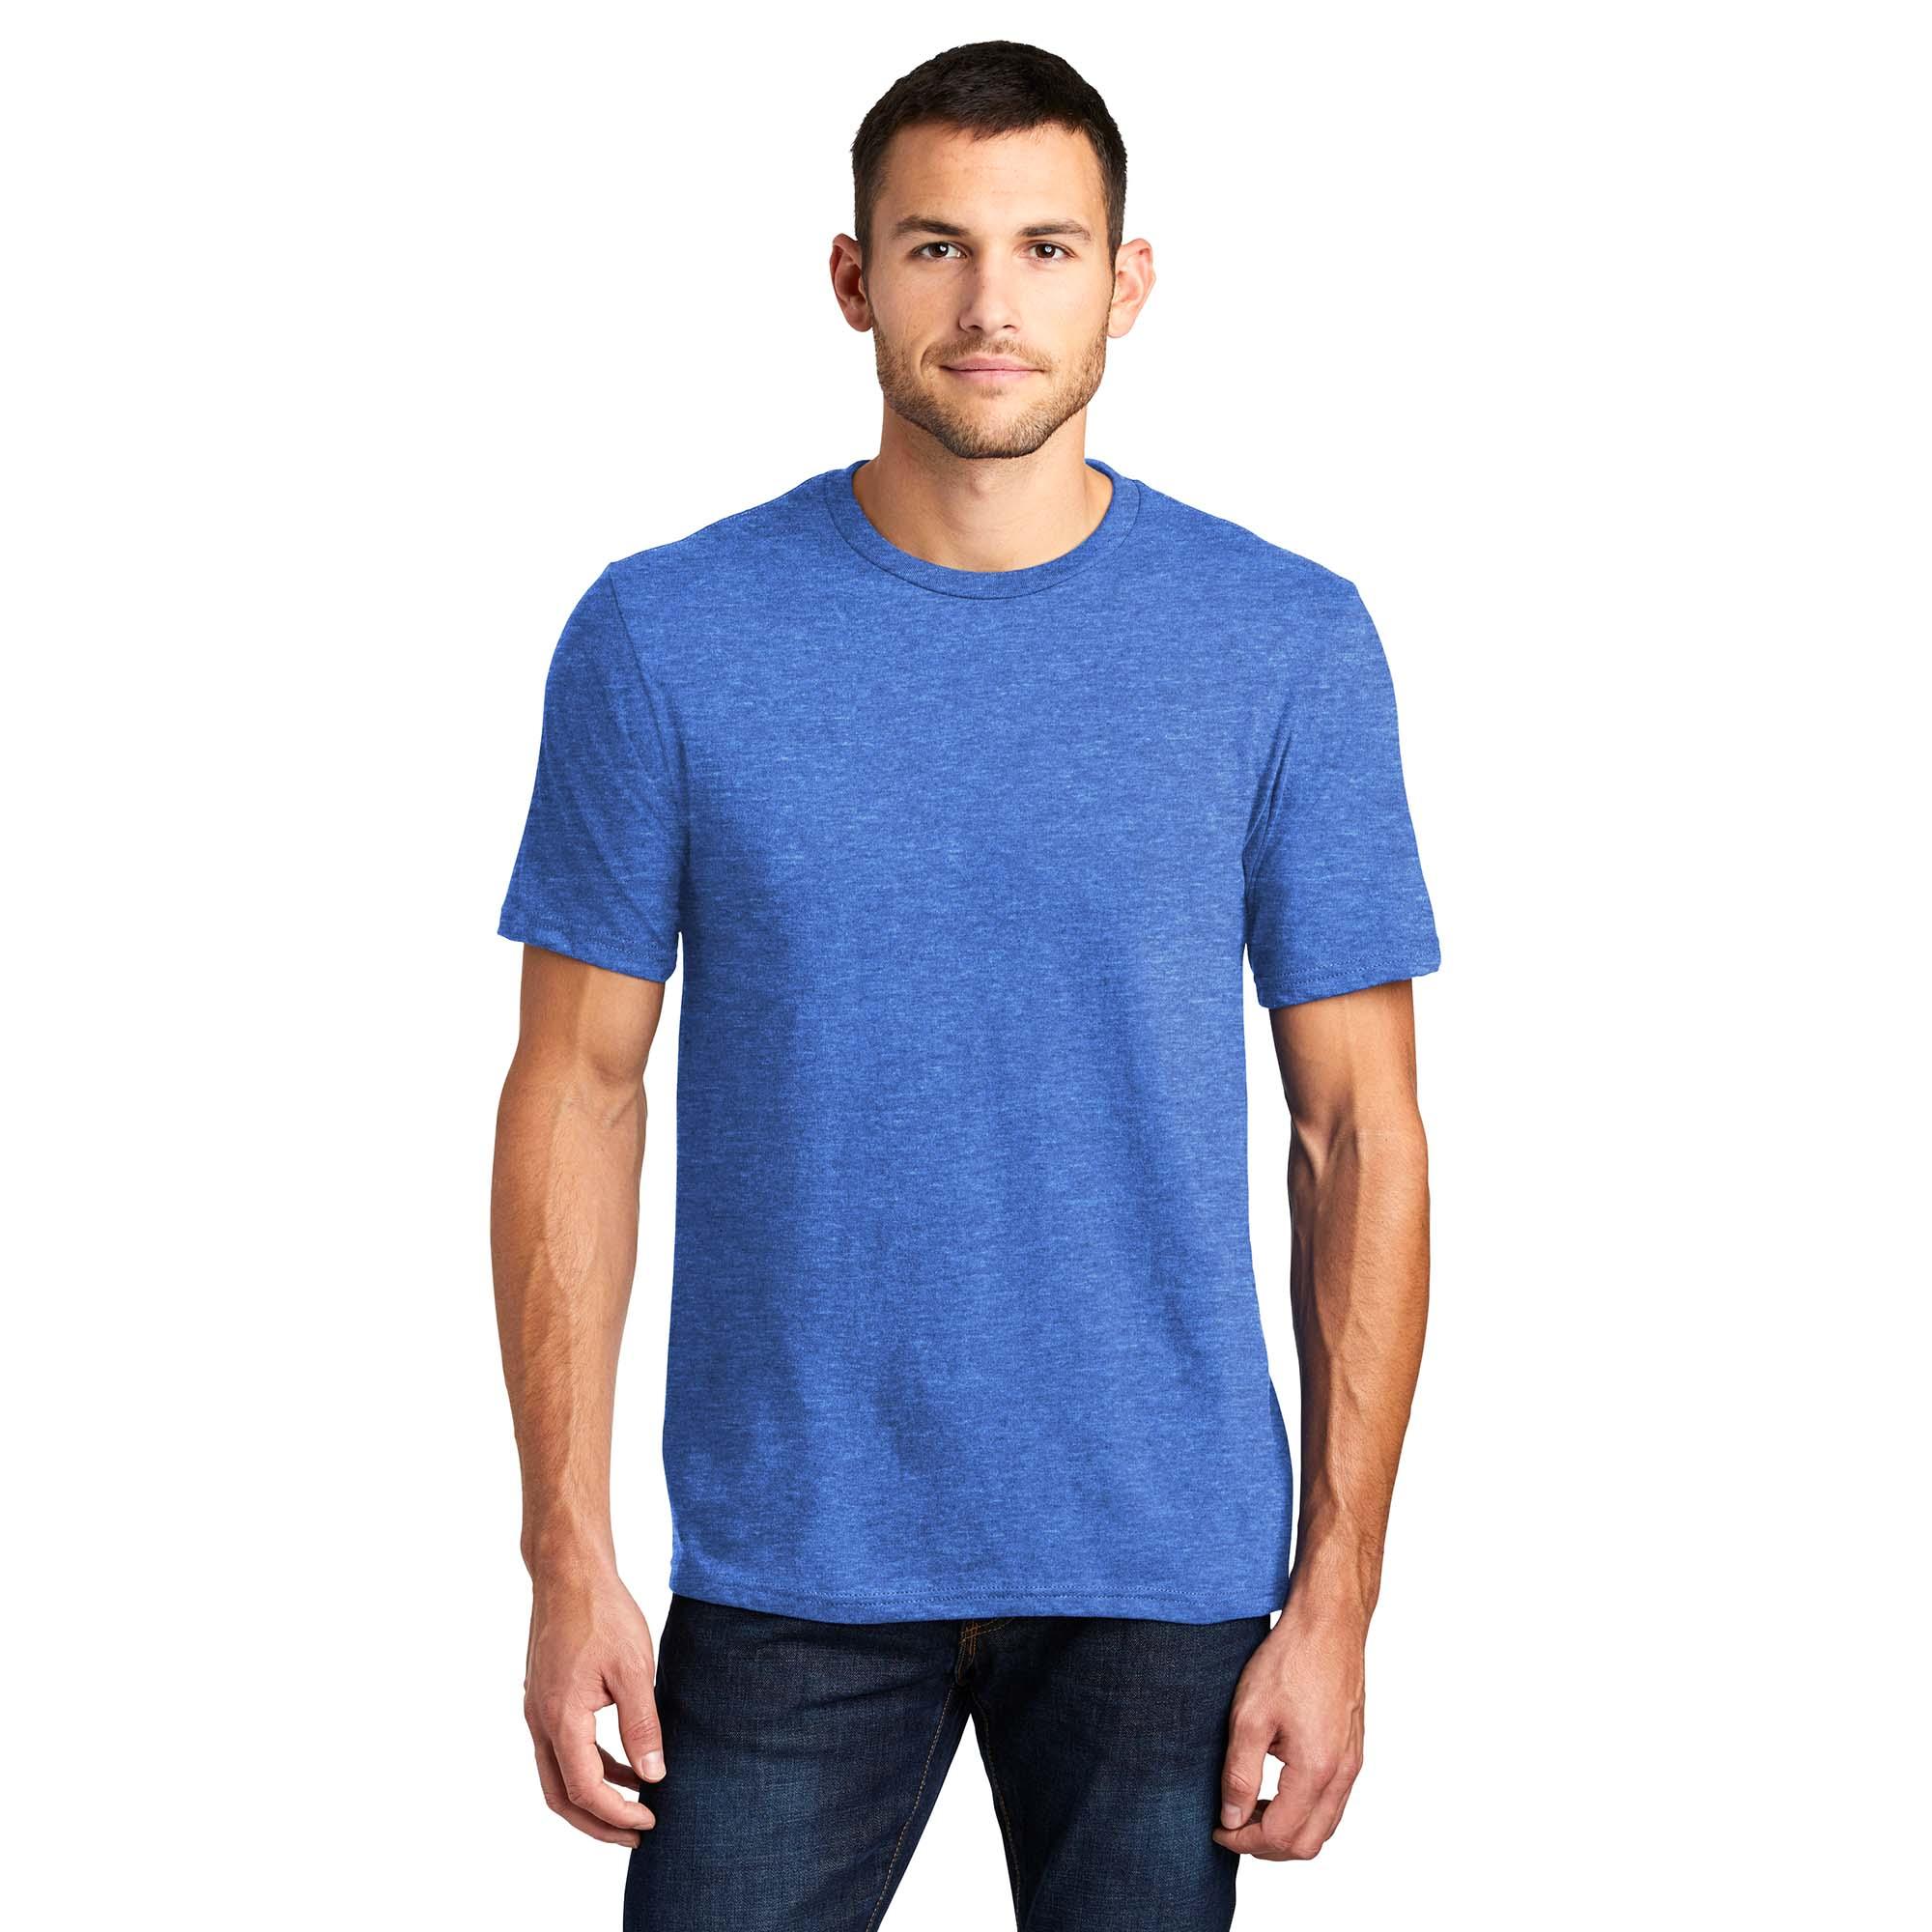 District DT6000 Very Important Tee - Heathered Royal | Full Source